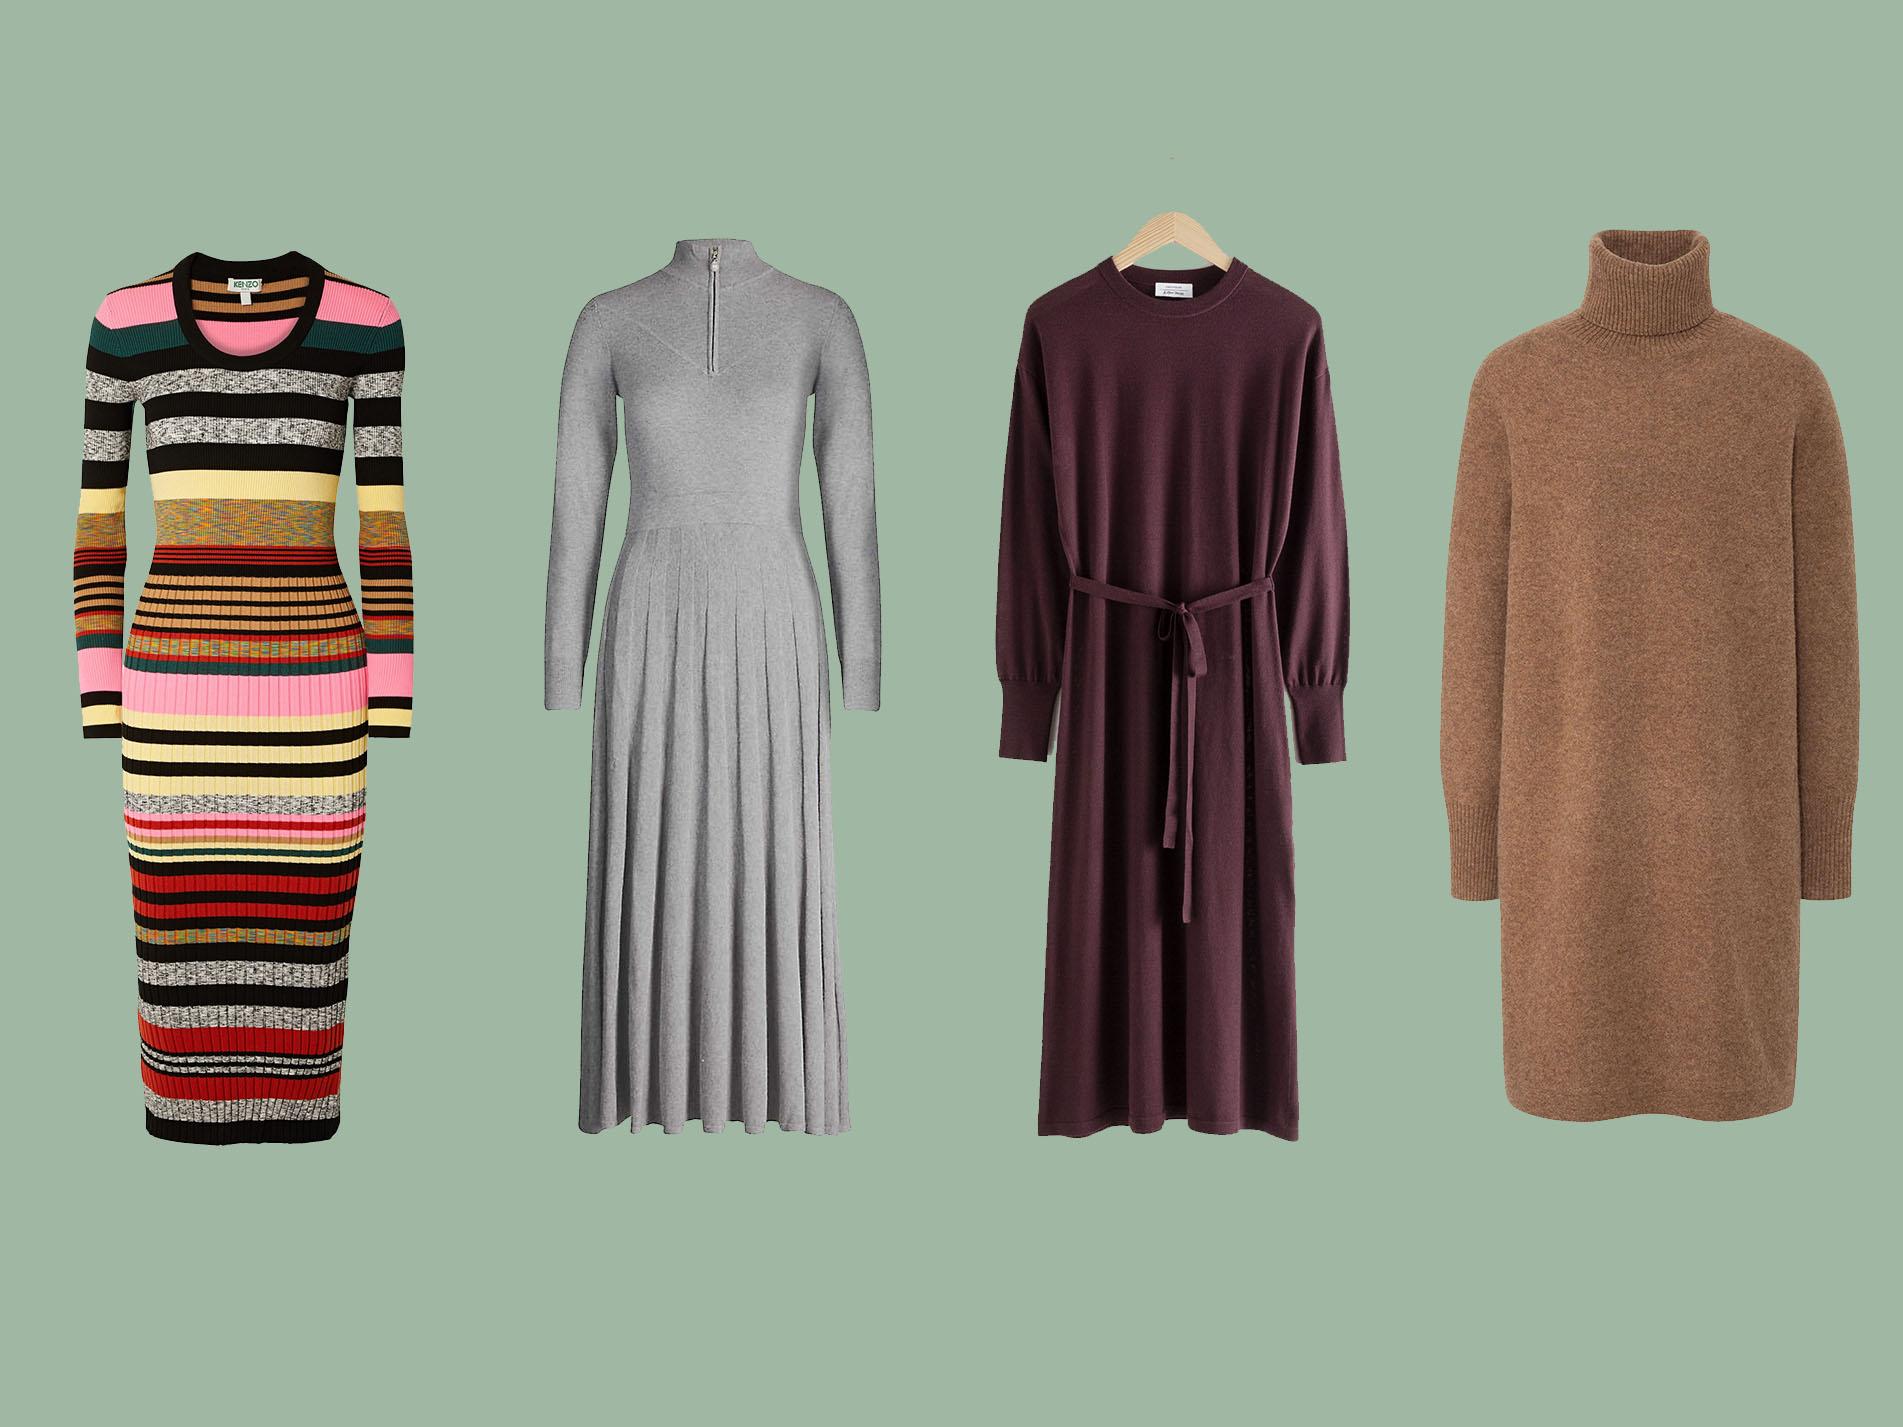 Kenzo, Striped Ribbed Knit Midi Dress, £415, Net-a-Porter; Claudie Pierlot, High-Neck Pleated Knitted Midi Dress, £280, Selfridges; Side Slit Knitted Midi dress, £85, &amp; Other Stories; 3D Knit Premium Lambswool Turtleneck Dress, £59.90, Uniqlo